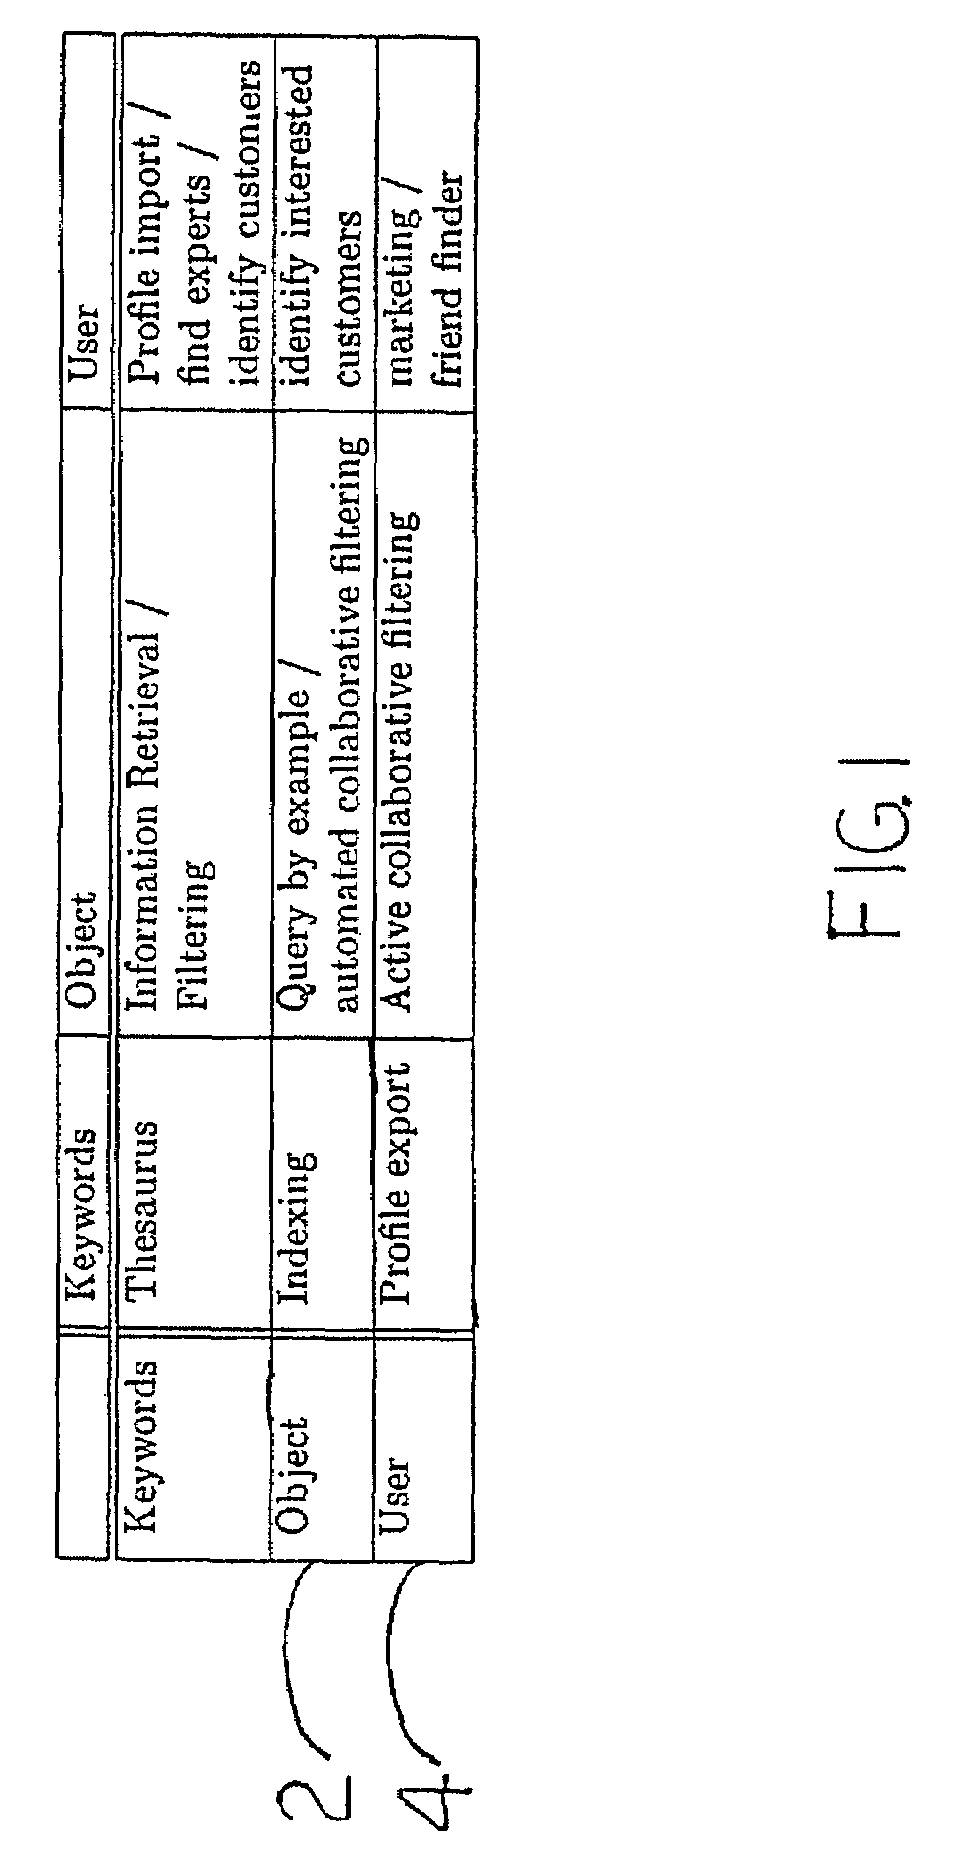 System and method for personalized search, information filtering, and for generating recommendations utilizing statistical latent class models